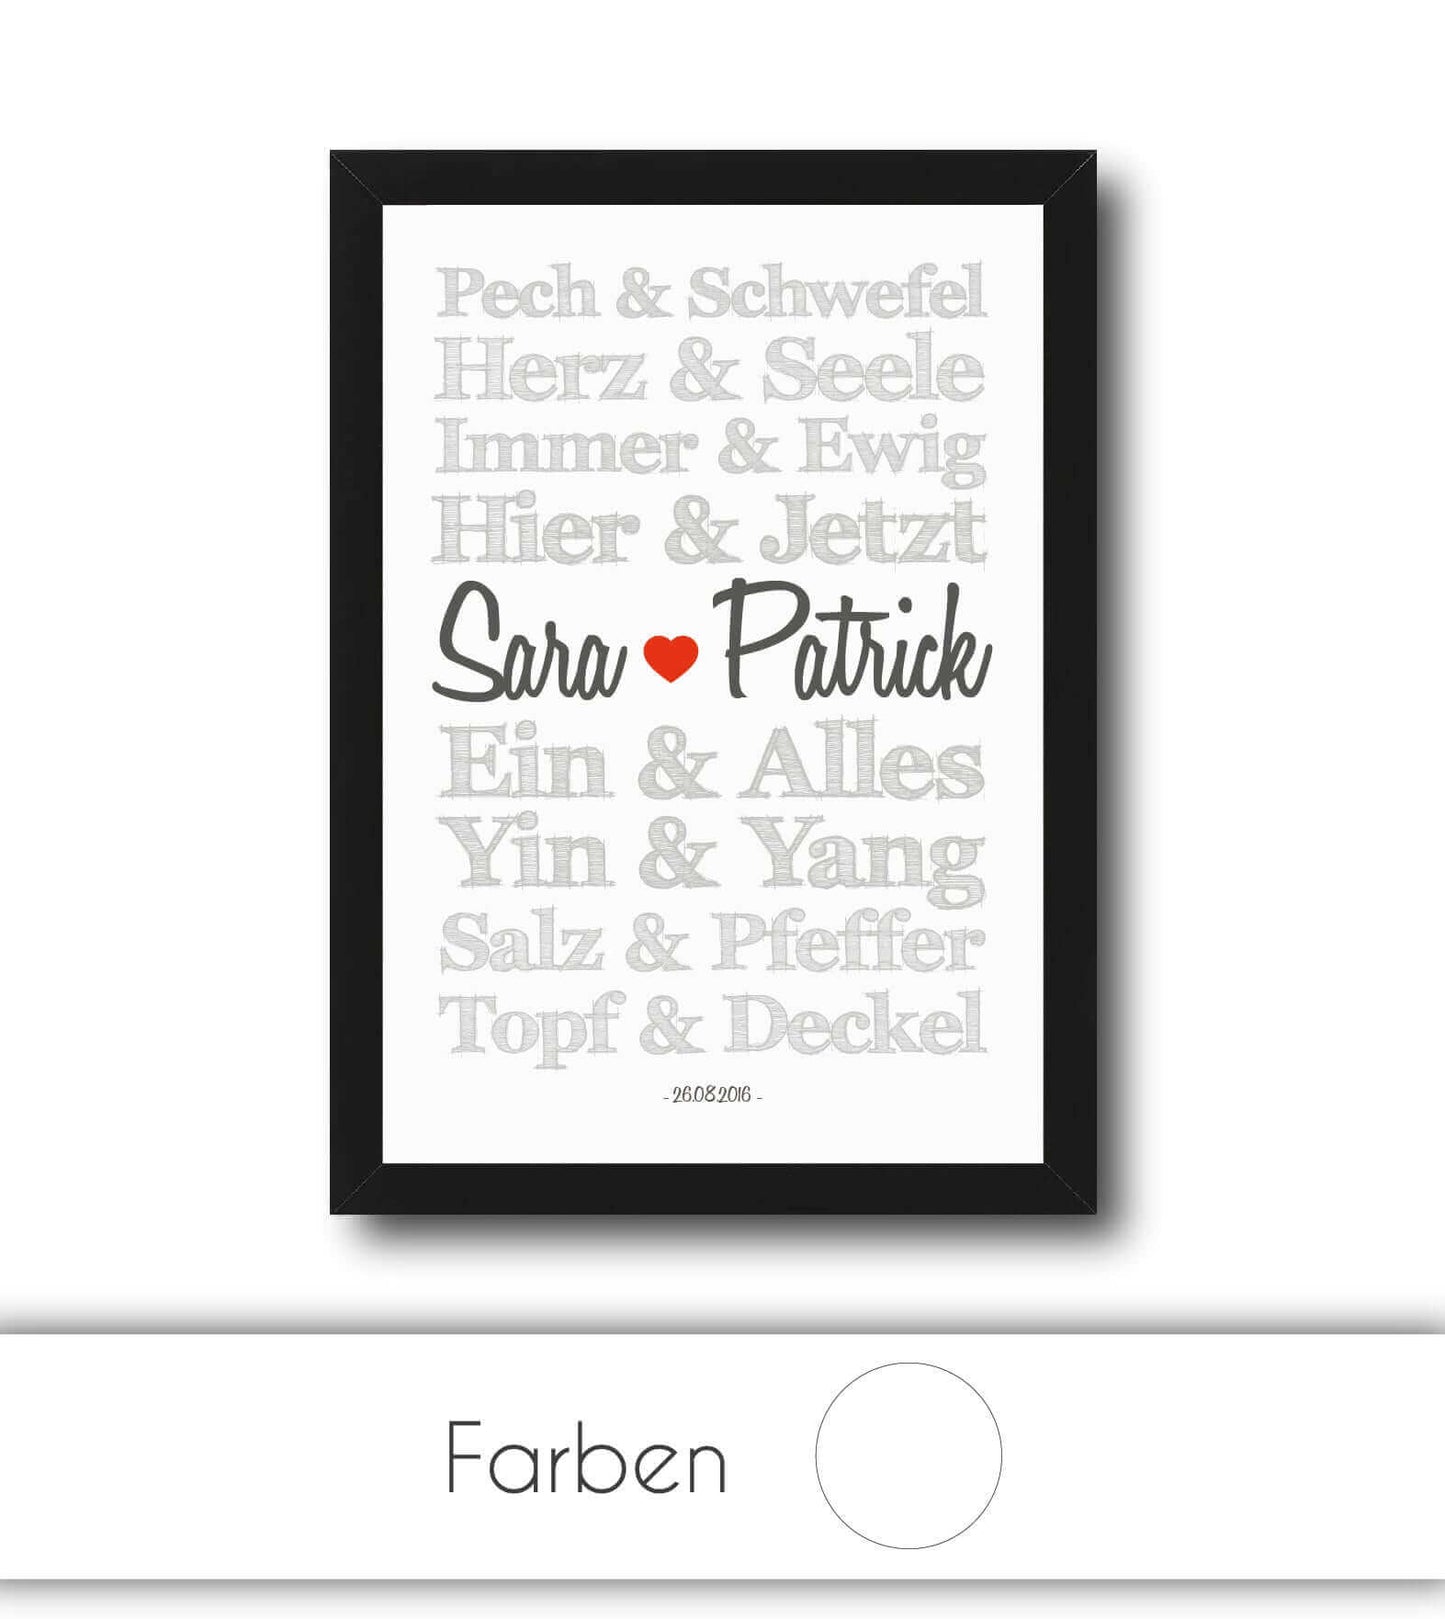 Personalized picture "DREAM COUPLES" - heart and soul